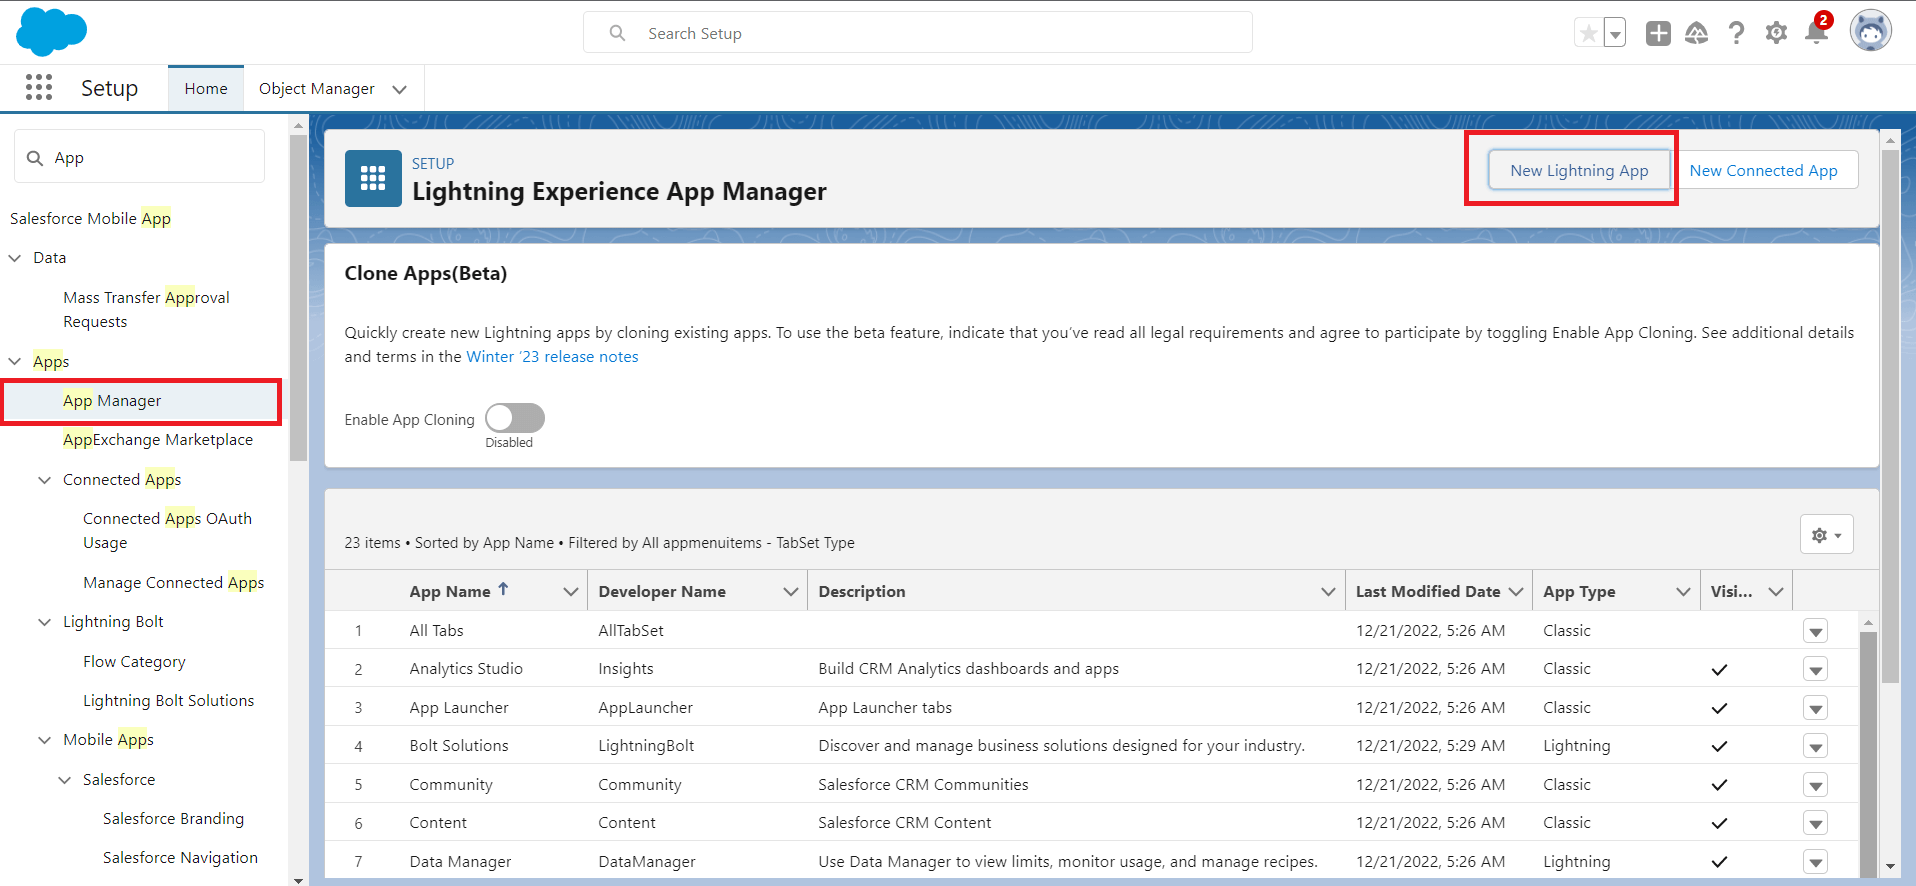 Lightning Experience App Manager